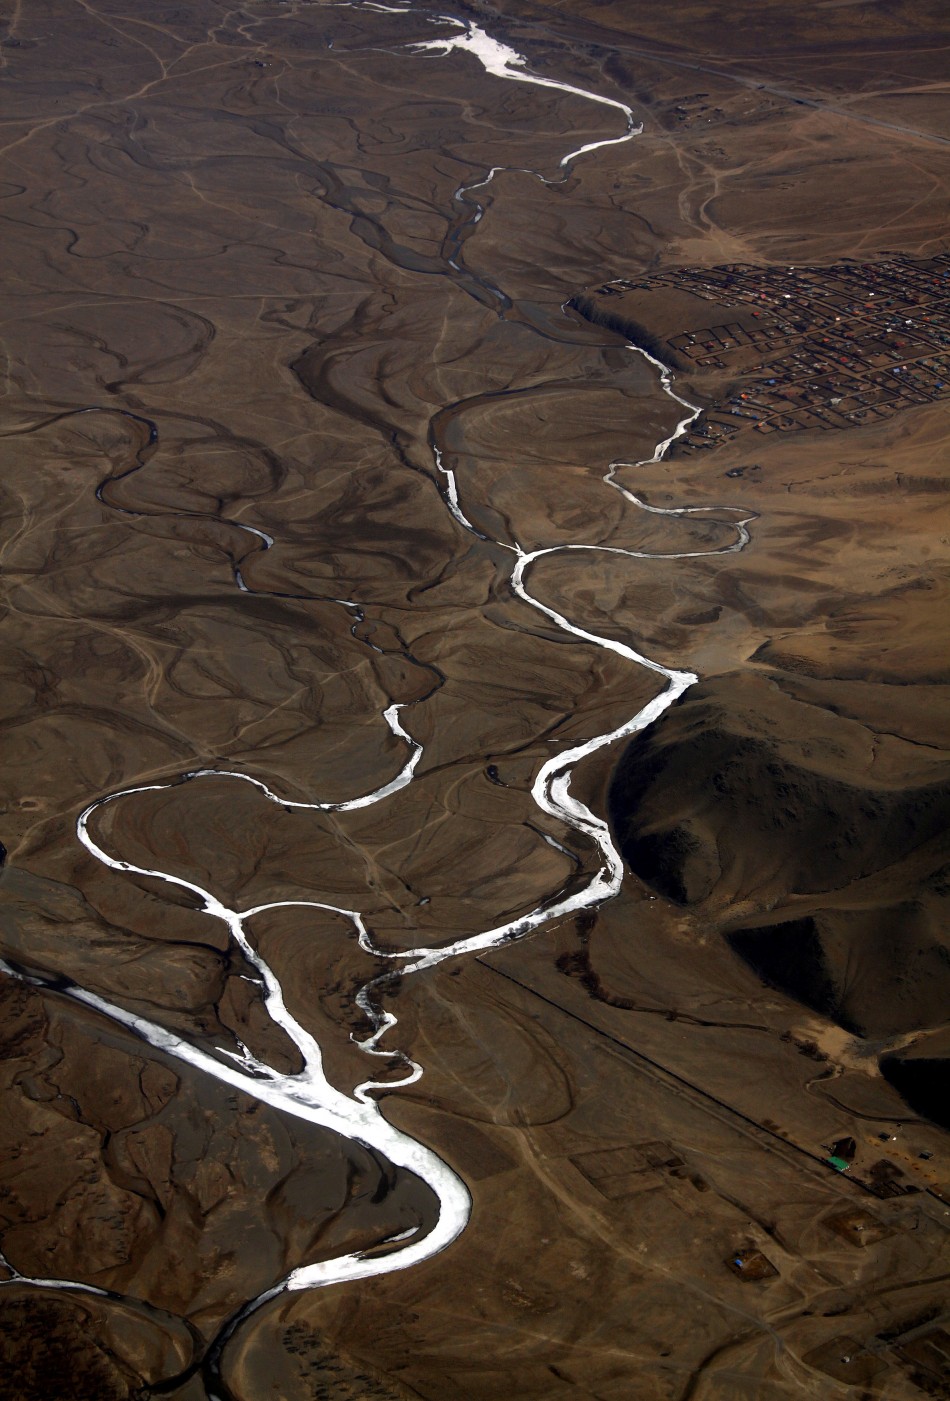 A frozen river is seen located on the outskirts of the Mongolian capital city of Ulan Bator